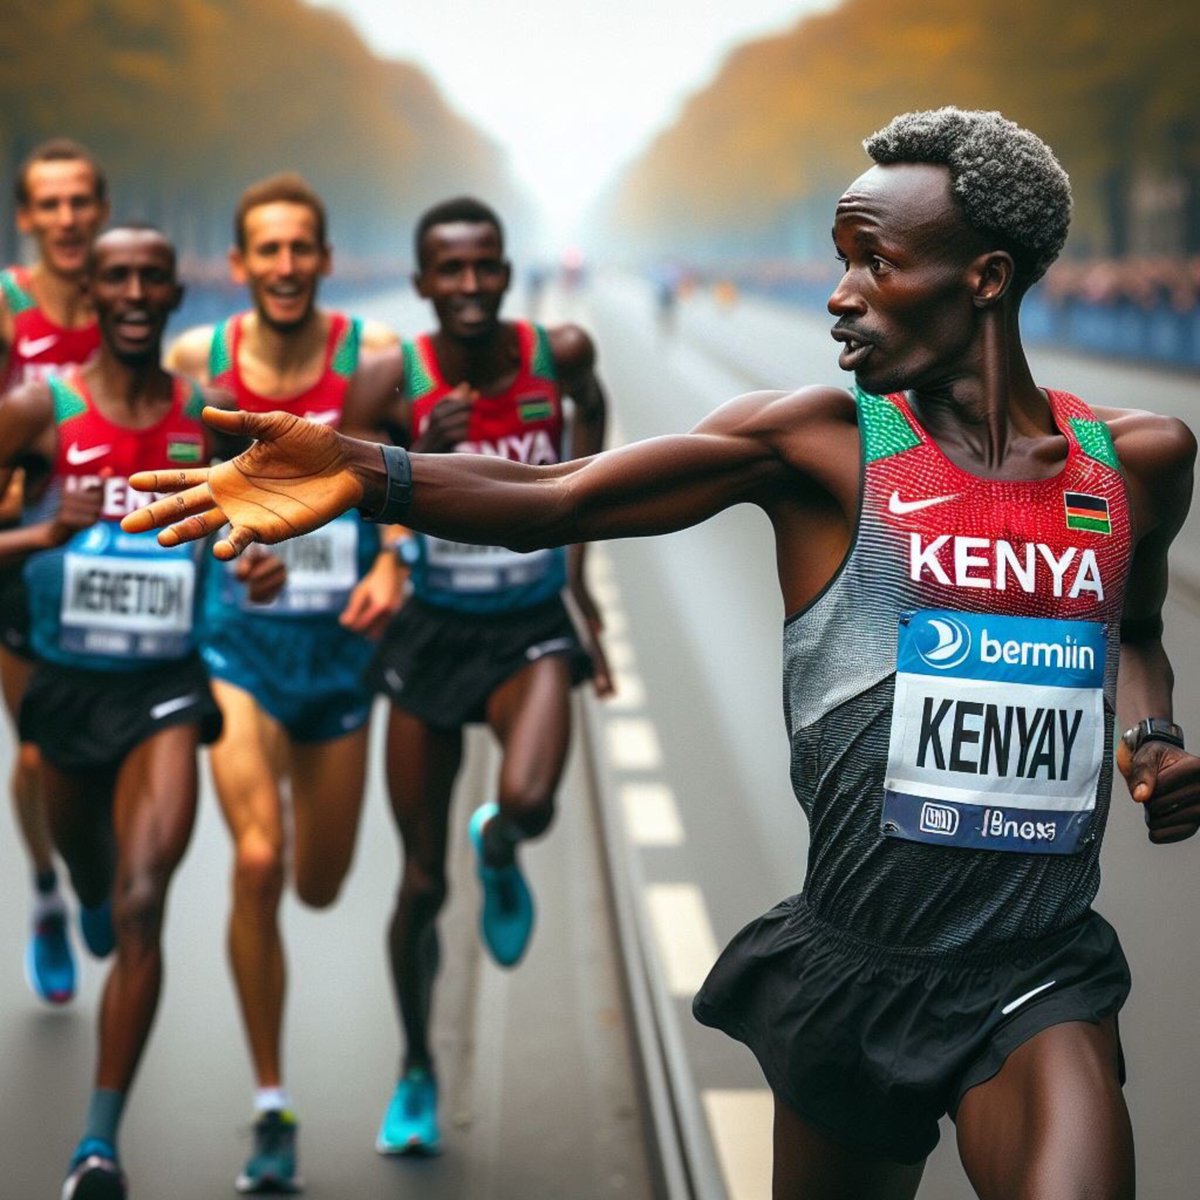 THE PACESETTER FROM BERLIN 🧵

It was on a Friday evening when I received a call from my longtime friend, Chepsirere. He was a talented athlete, but he shunned competitive races and opted for being a full- time pacemaker. He always said openly that his weak heart couldn’t….